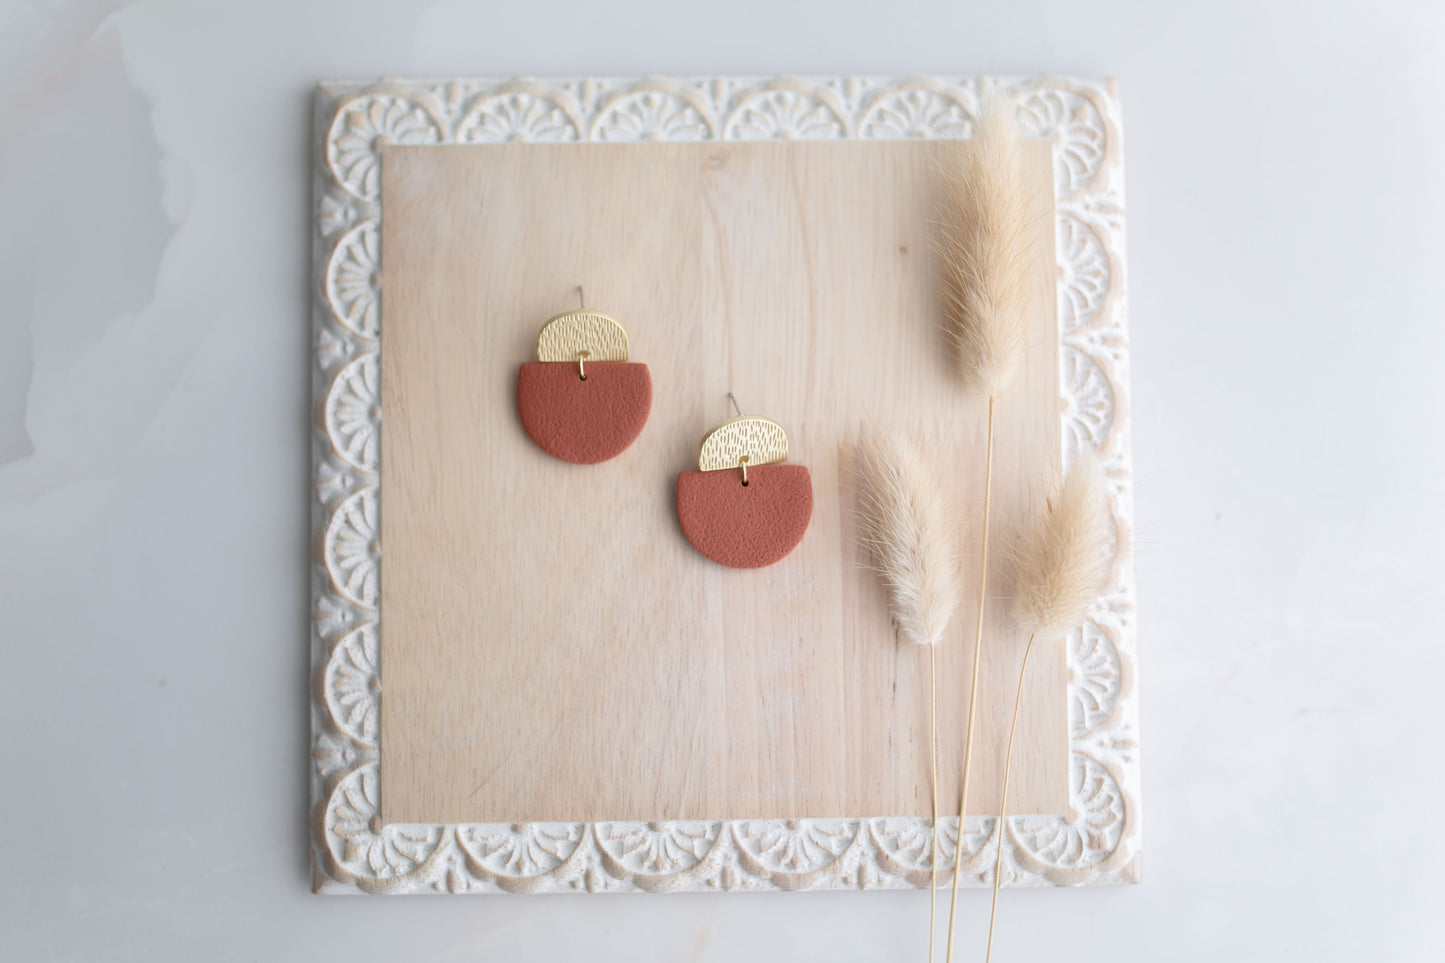 Clay earring | tera-cotta + simple | Southwest Collection